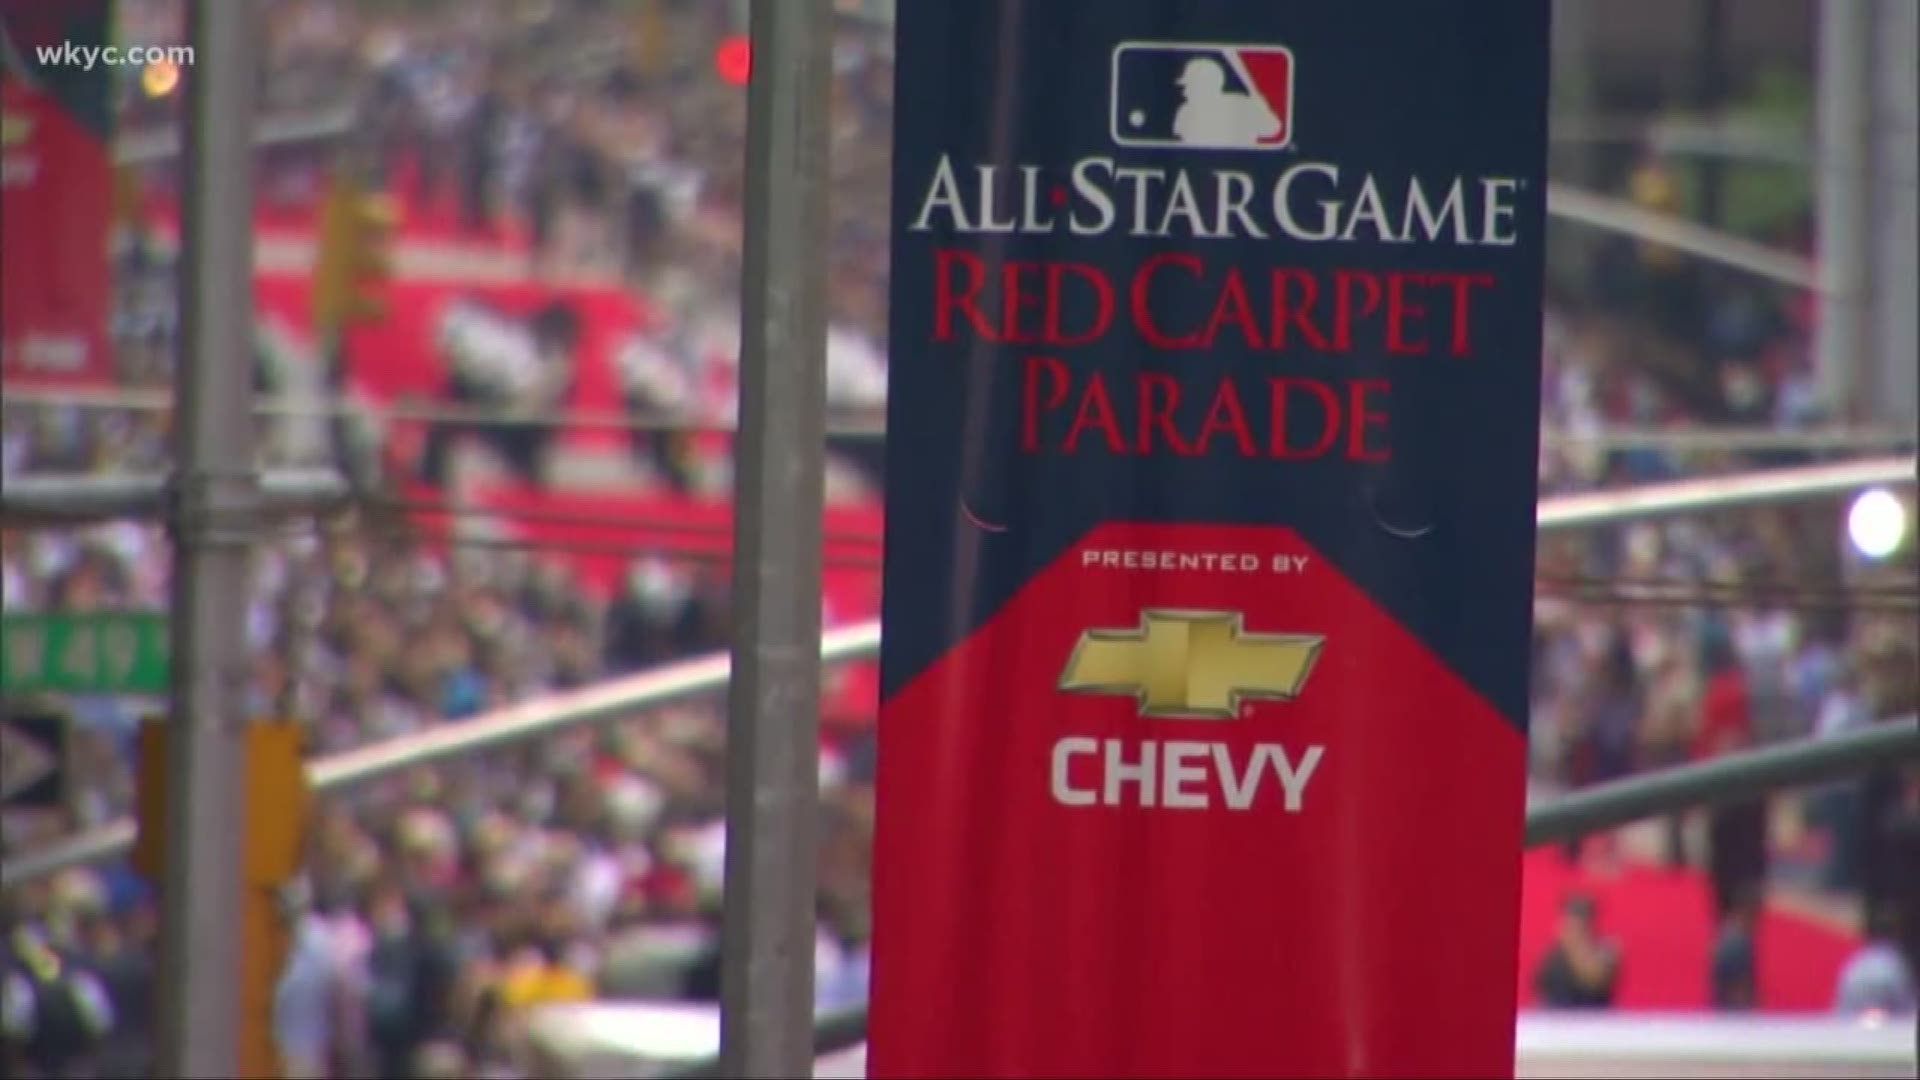 July 8, 2019: Cleveland is rolling out the red carpet as more than 70 MLB All-Stars will participate in a special parade through the city at 12:30 p.m. July 9 -- just hours ahead of the 2019 All-Star Game at Progressive Field. Even cooler? MLB officials announced that former Cleveland Indians favorites Jim Thome and Sandy Alomar Jr. will serve as Grand Marshals for the parade. They will lead the event riding inside a 2019 Chevrolet Corvette.